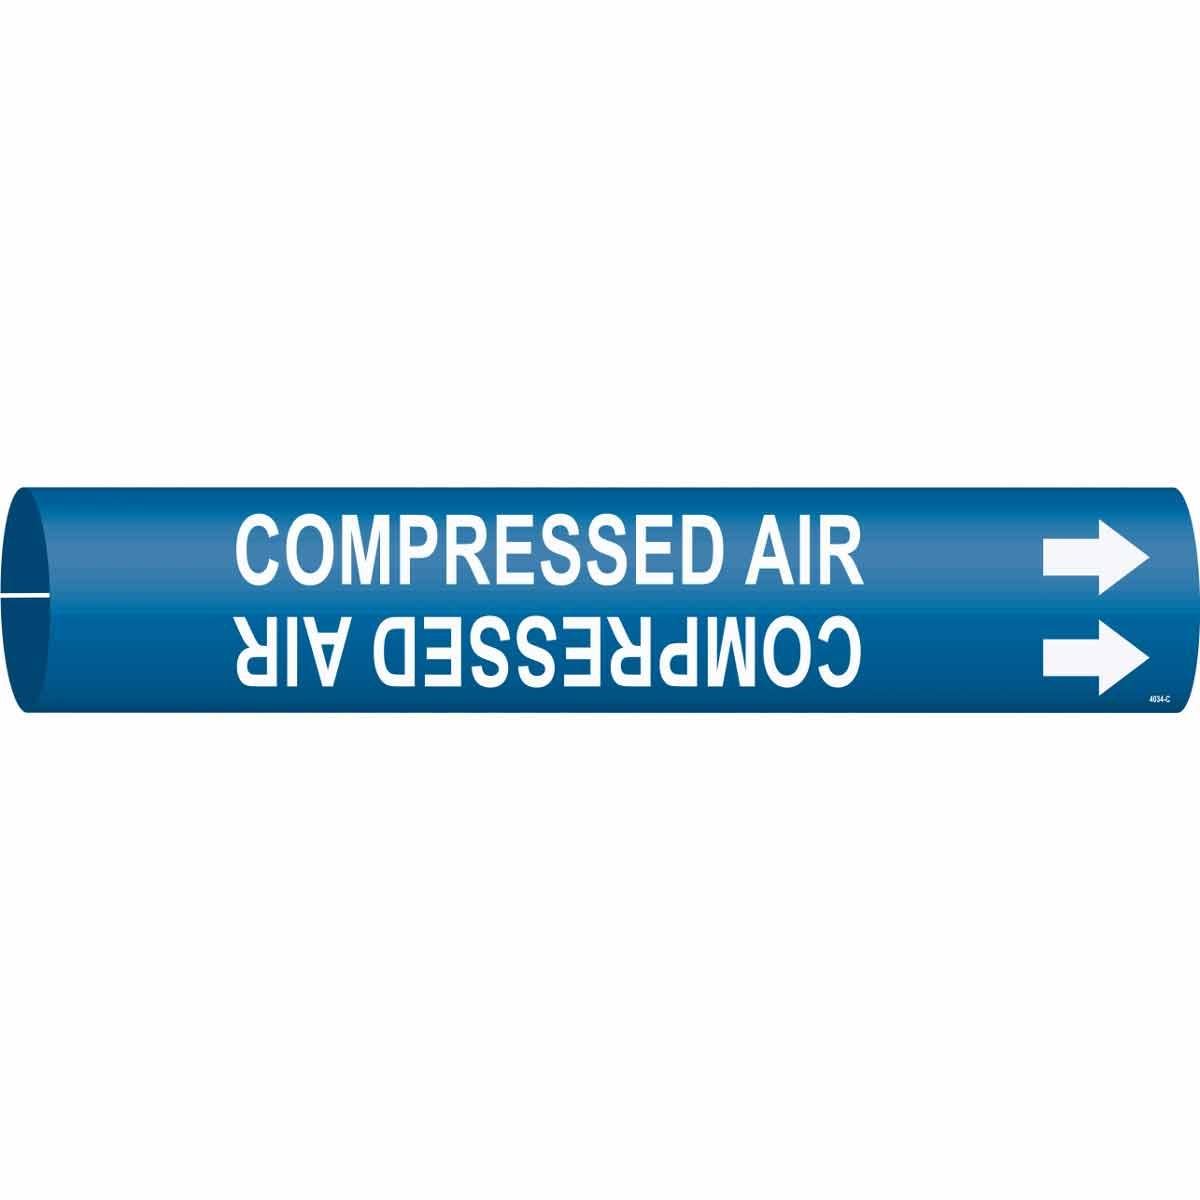 Brady® BradySnap-On™ 4034-A A Style Pipe and Valve Marker, COMPRESSED AIR with Down Arrow Symbol Legend, White on Blue, Fits Pipe Dia: 3/4 to 1-3/8 in, B-915 Plastic, Snap-On Mount